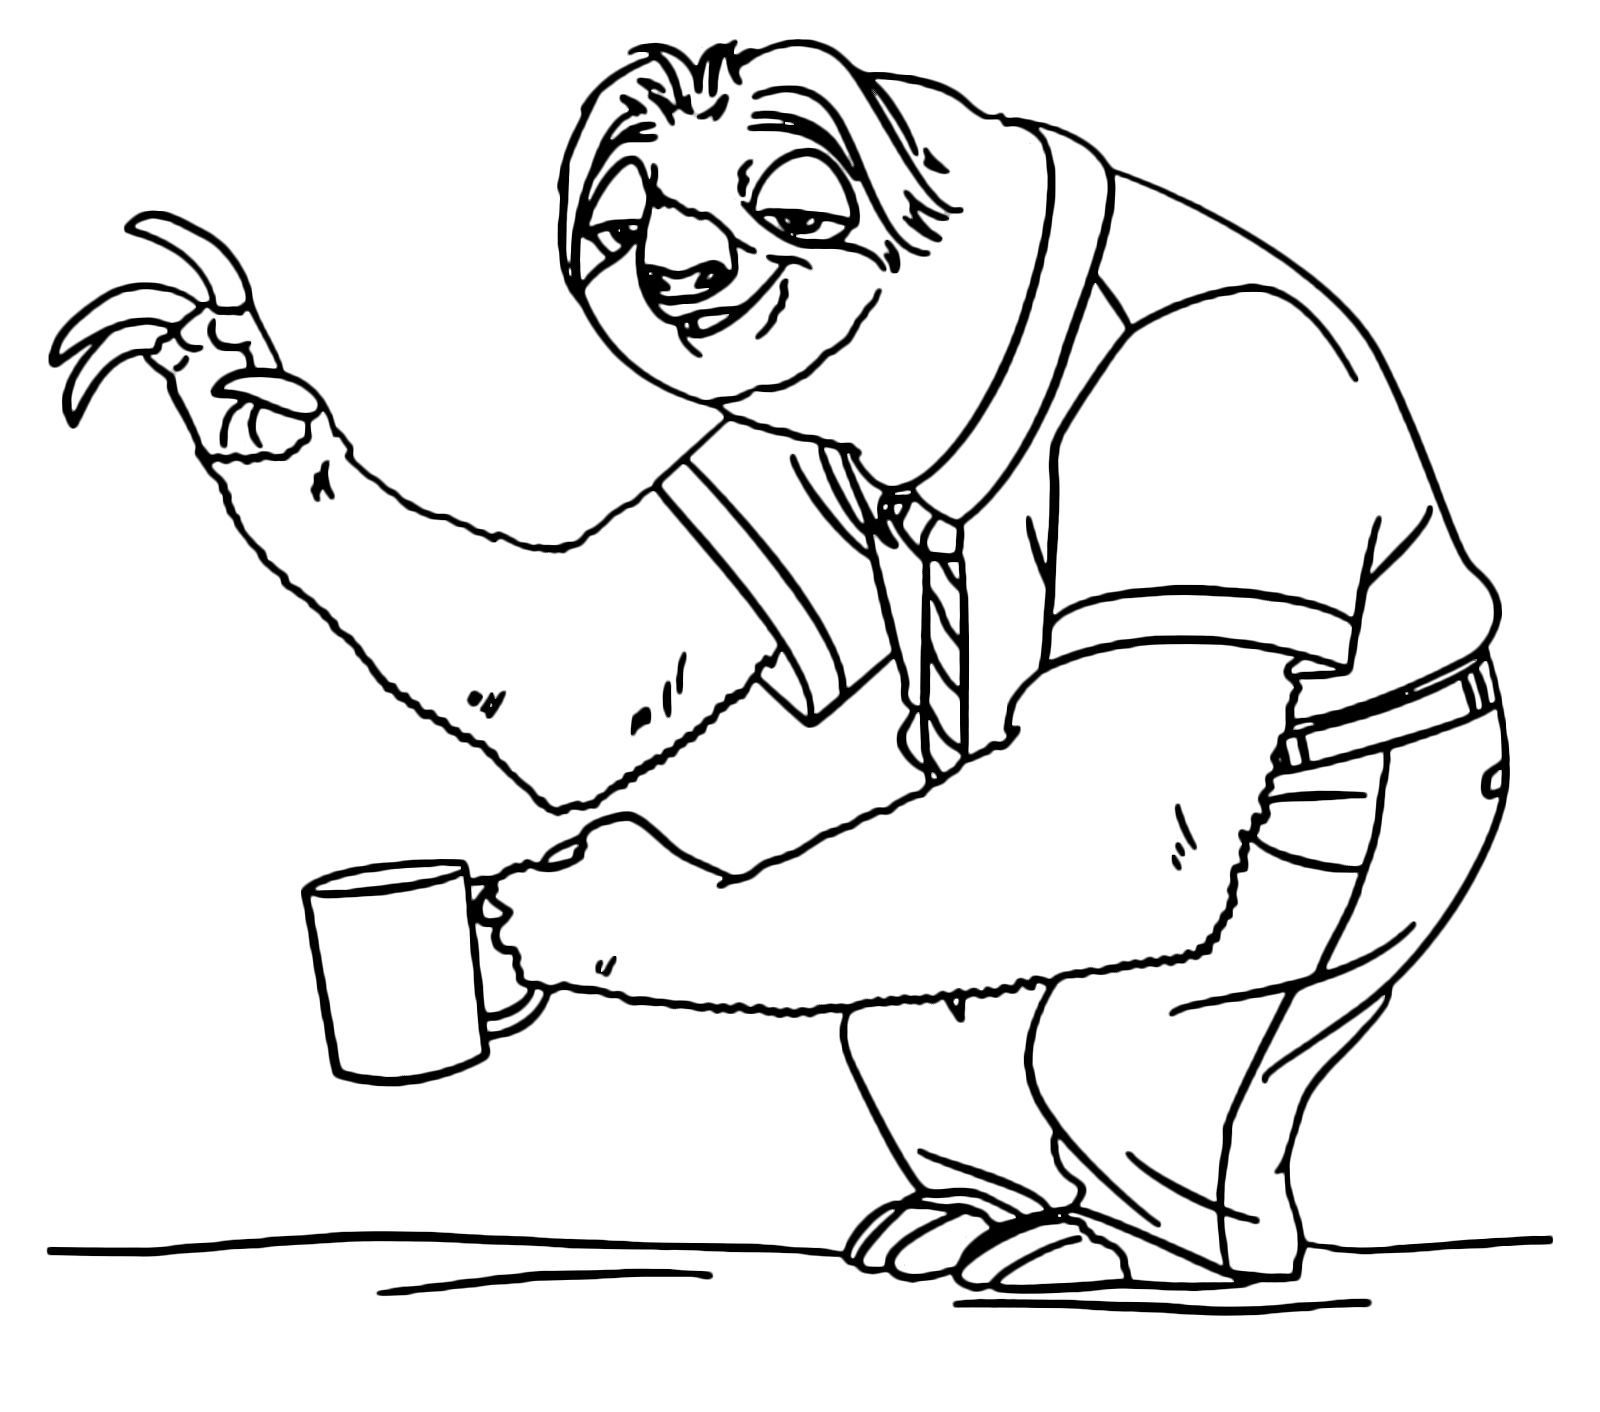 Flash Slothmore greets with cup in hand Coloring Page